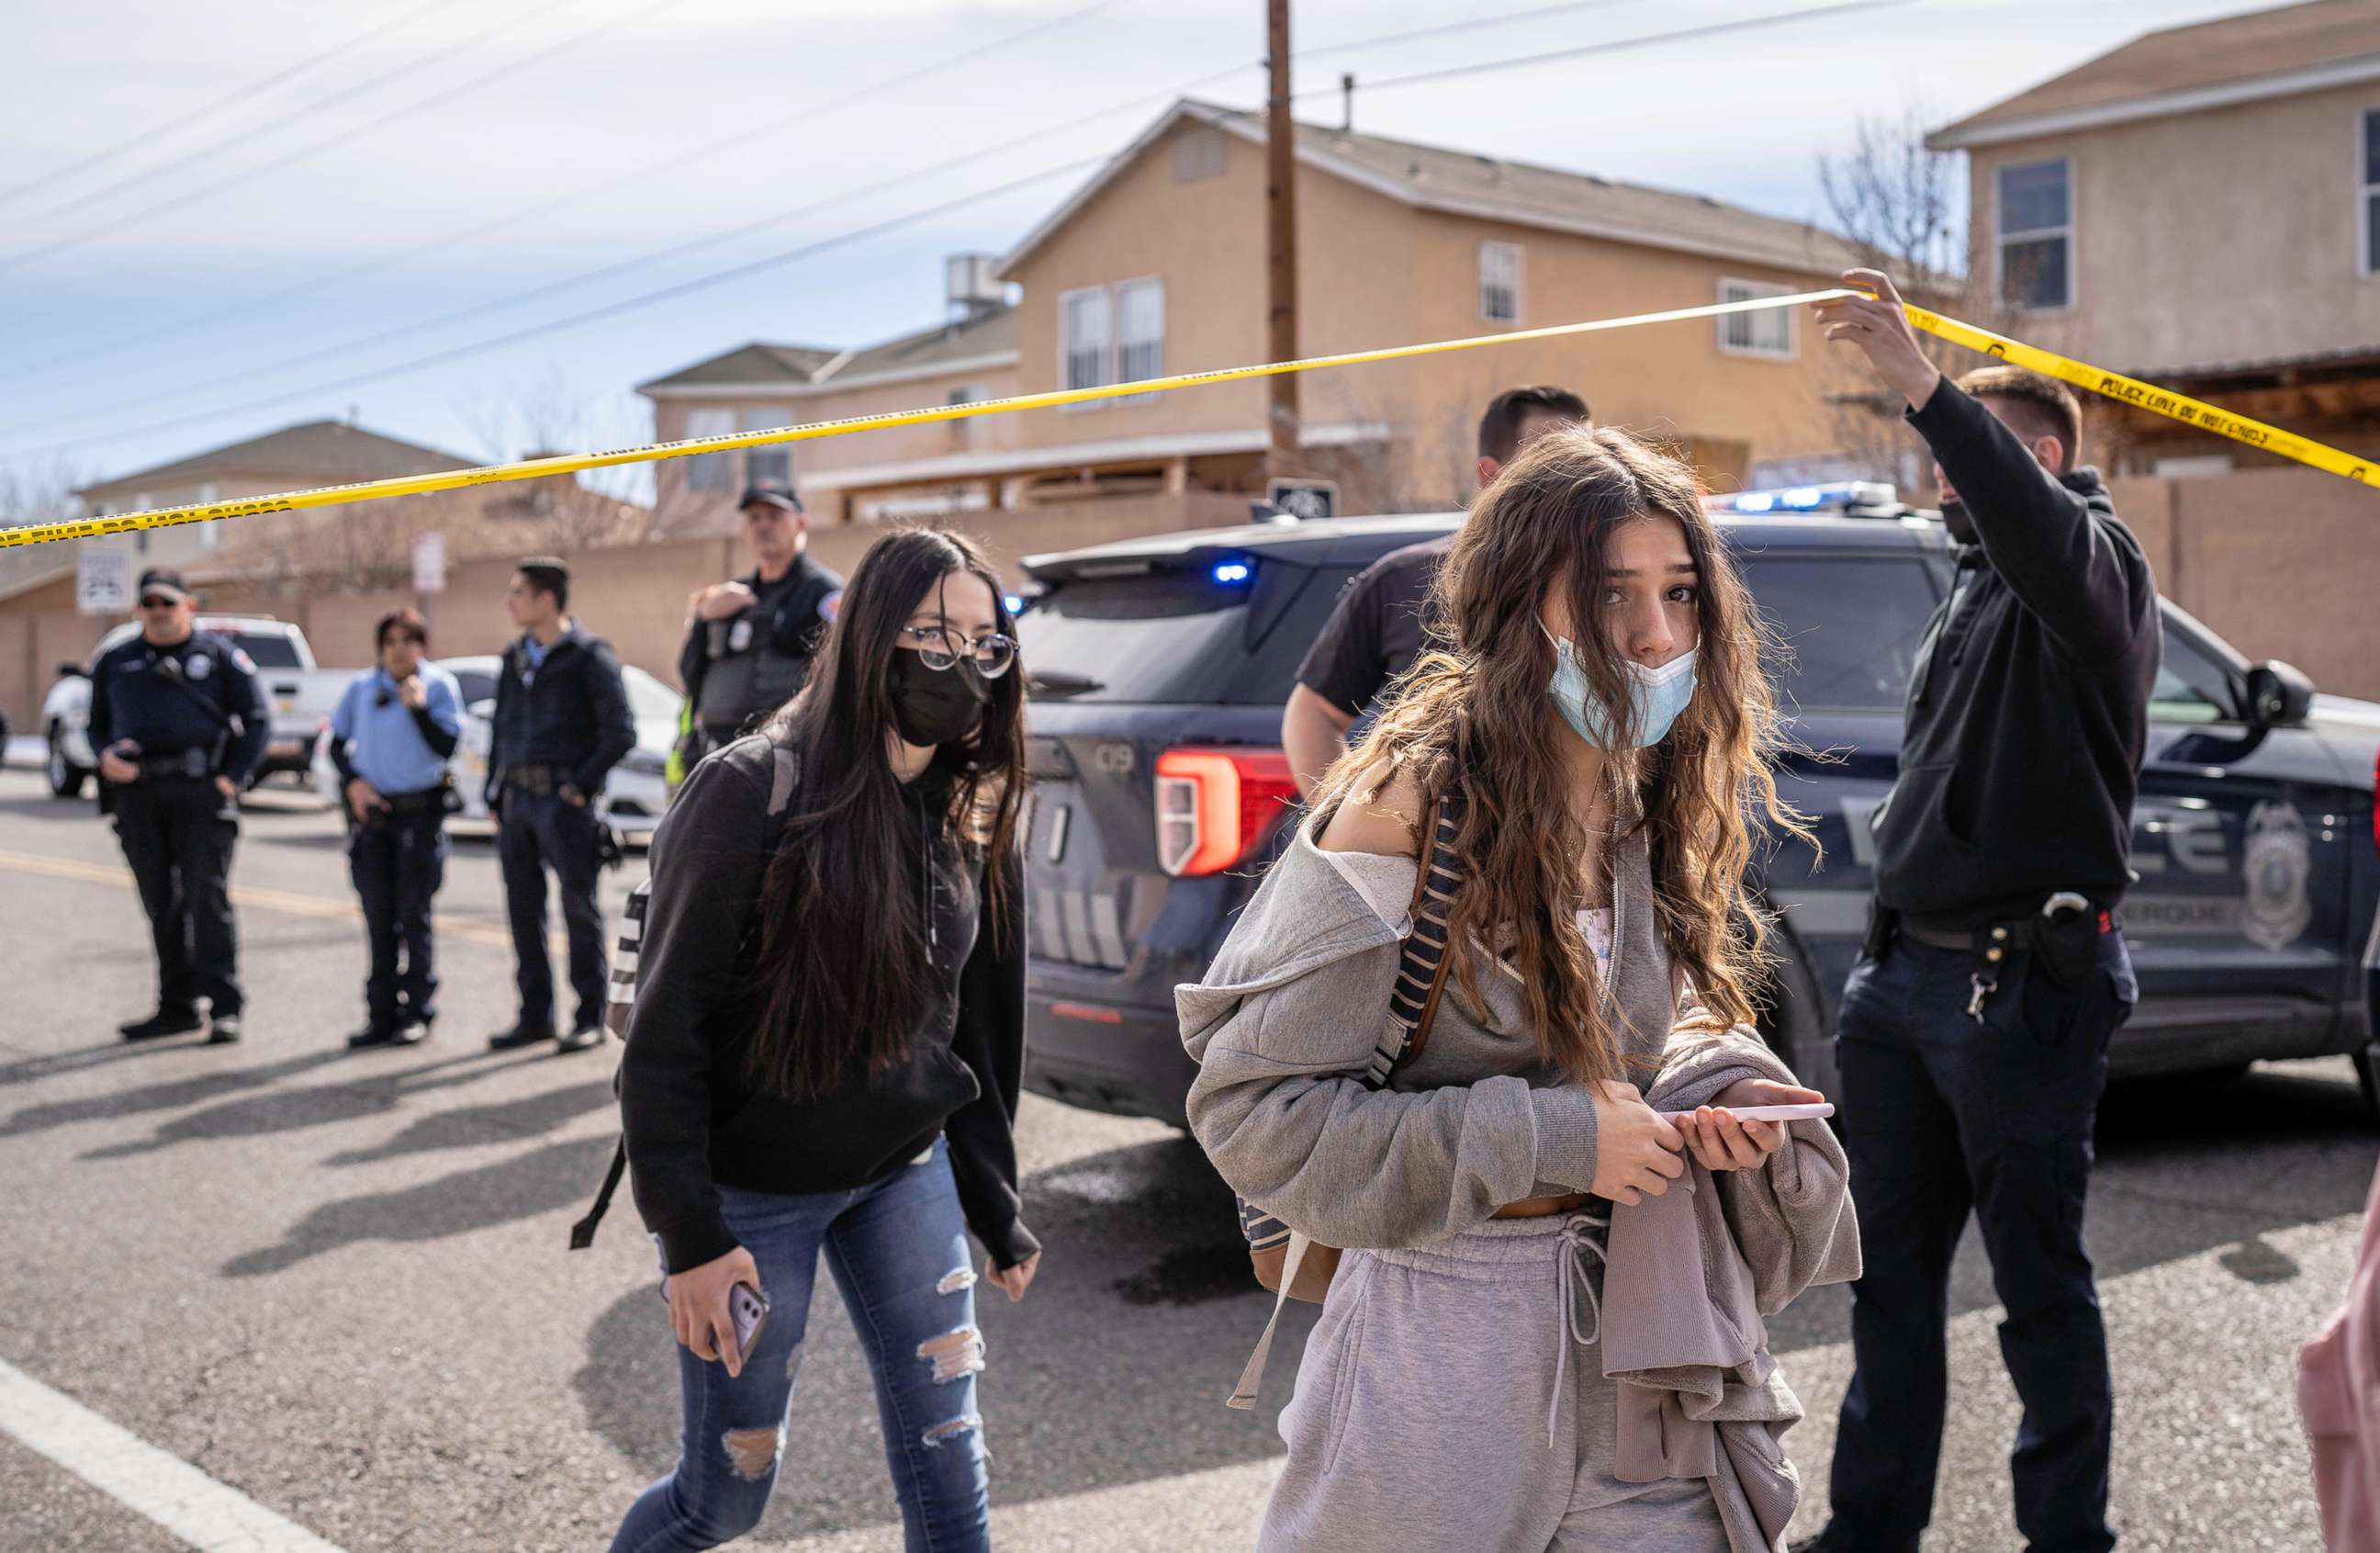 PHOTO: In this Feb. 25, 2022, file photo, students are released from school to go and join their parents in a nearby field after a student was killed in a shooting near West Mesa High School, in Albuquerque, N.M.